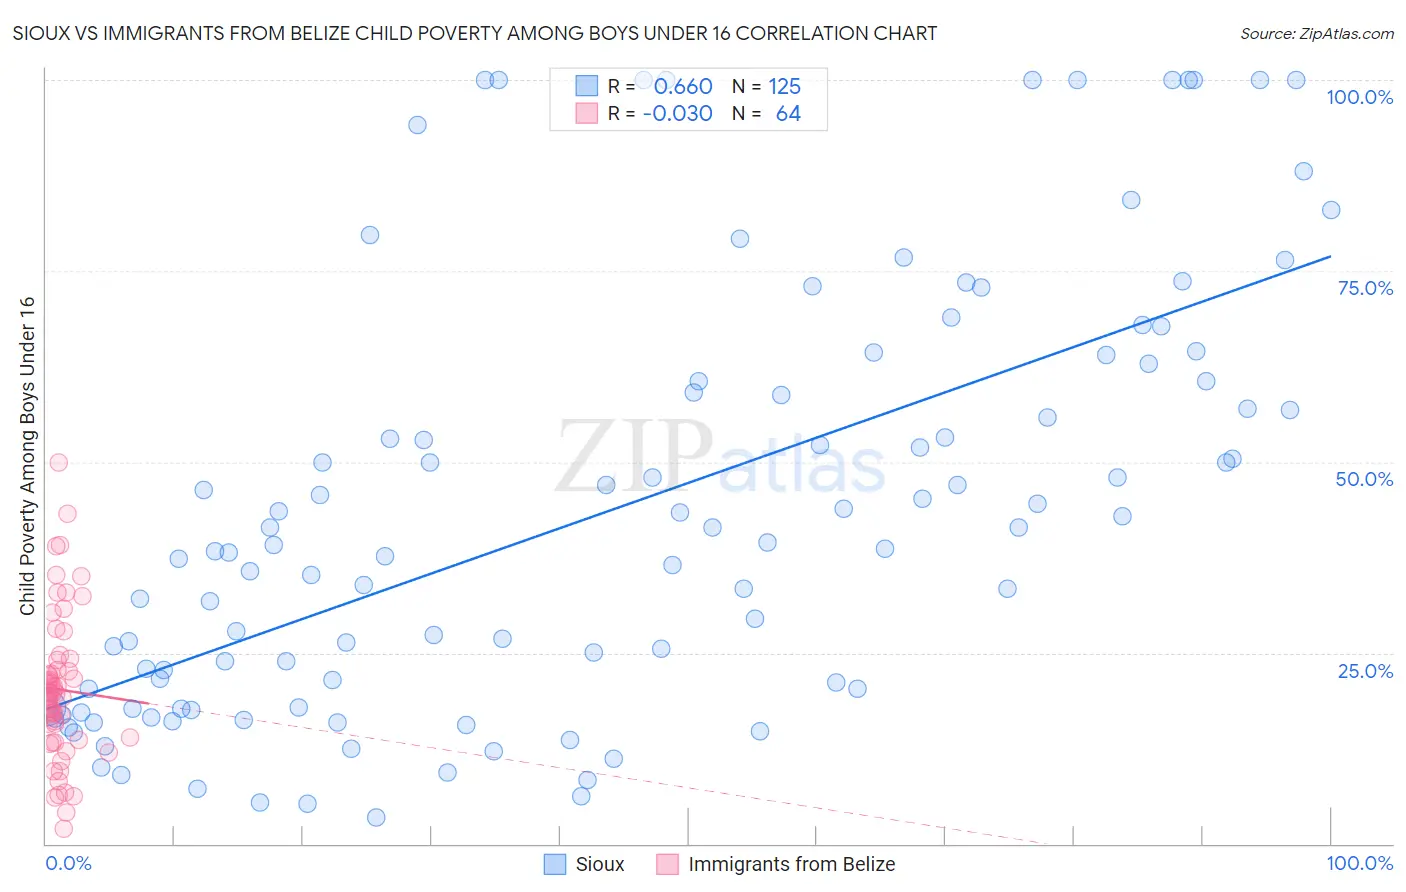 Sioux vs Immigrants from Belize Child Poverty Among Boys Under 16